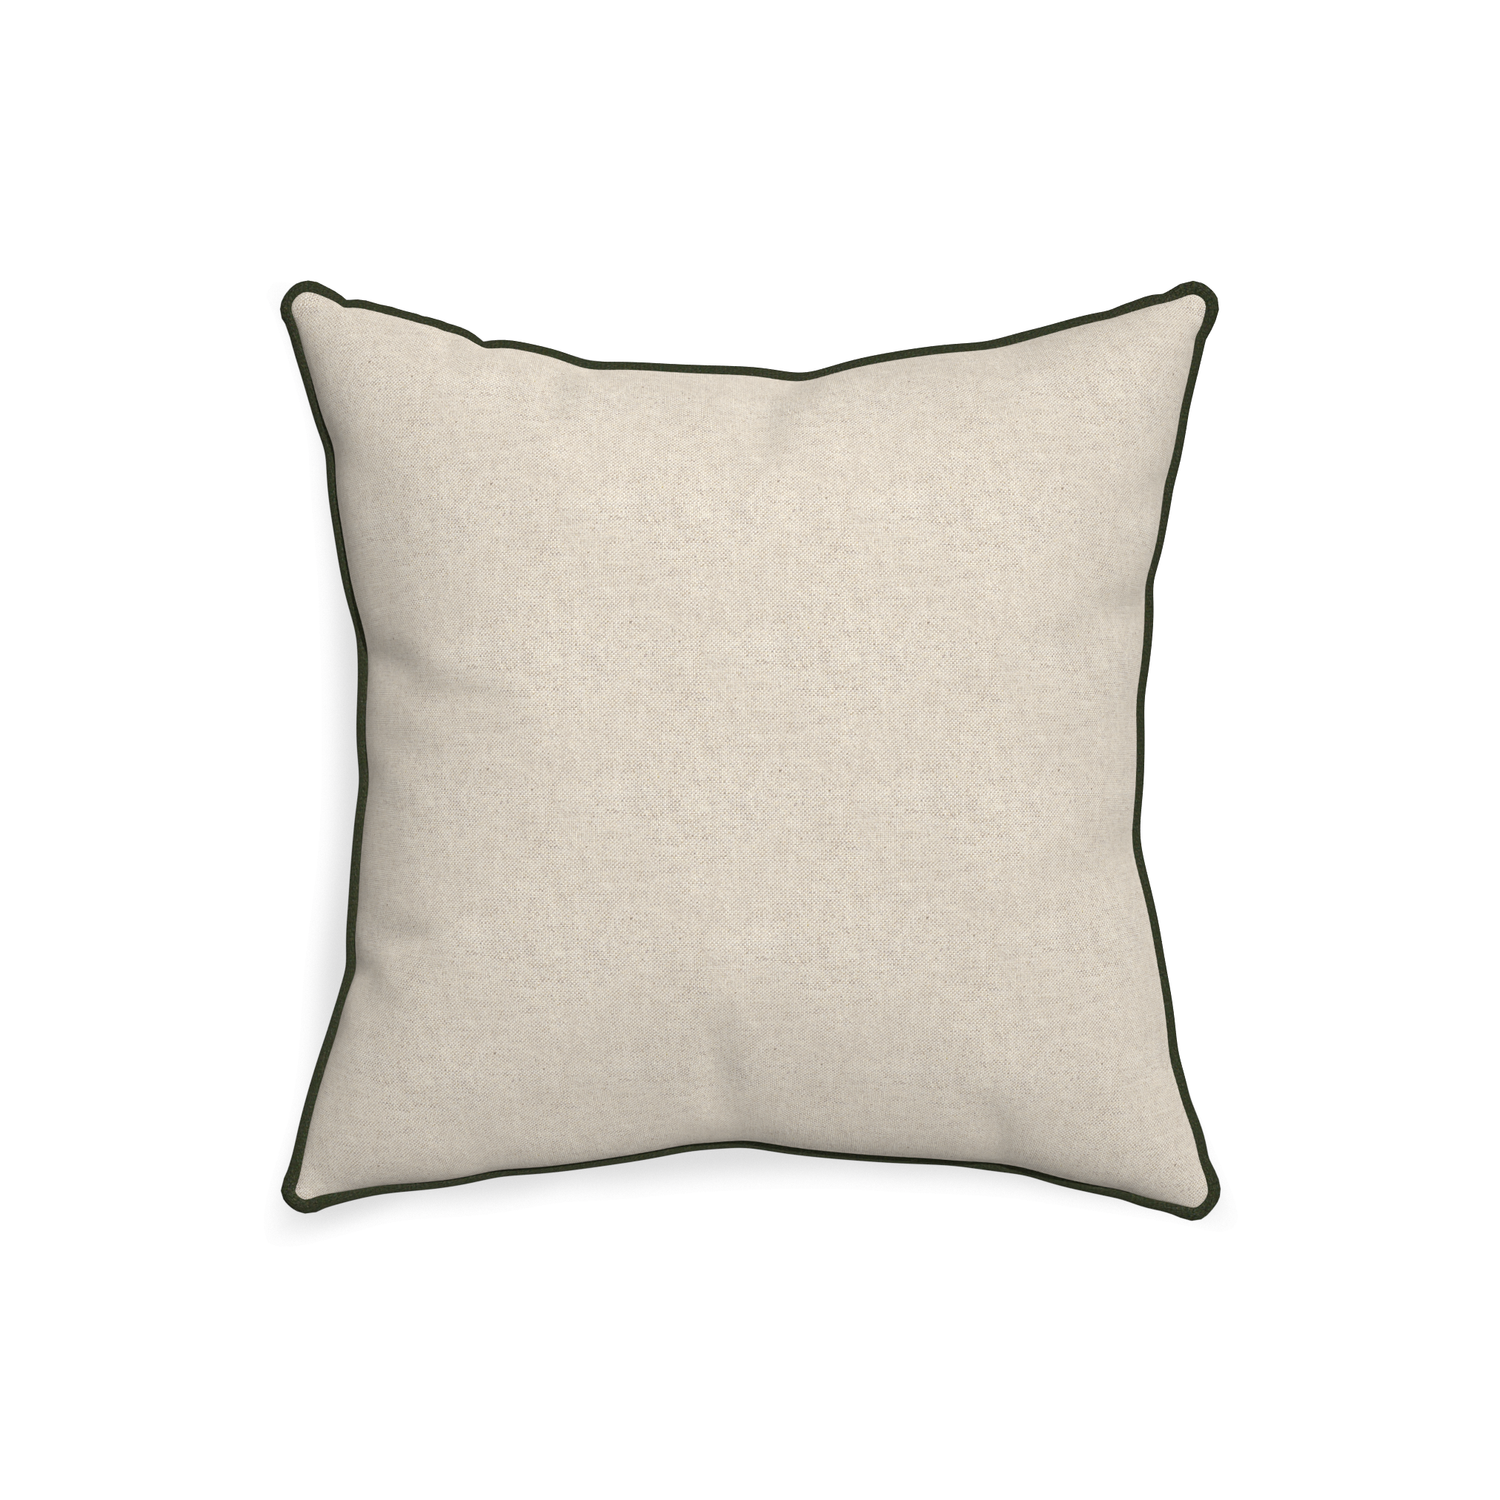 20-square oat custom light brownpillow with f piping on white background